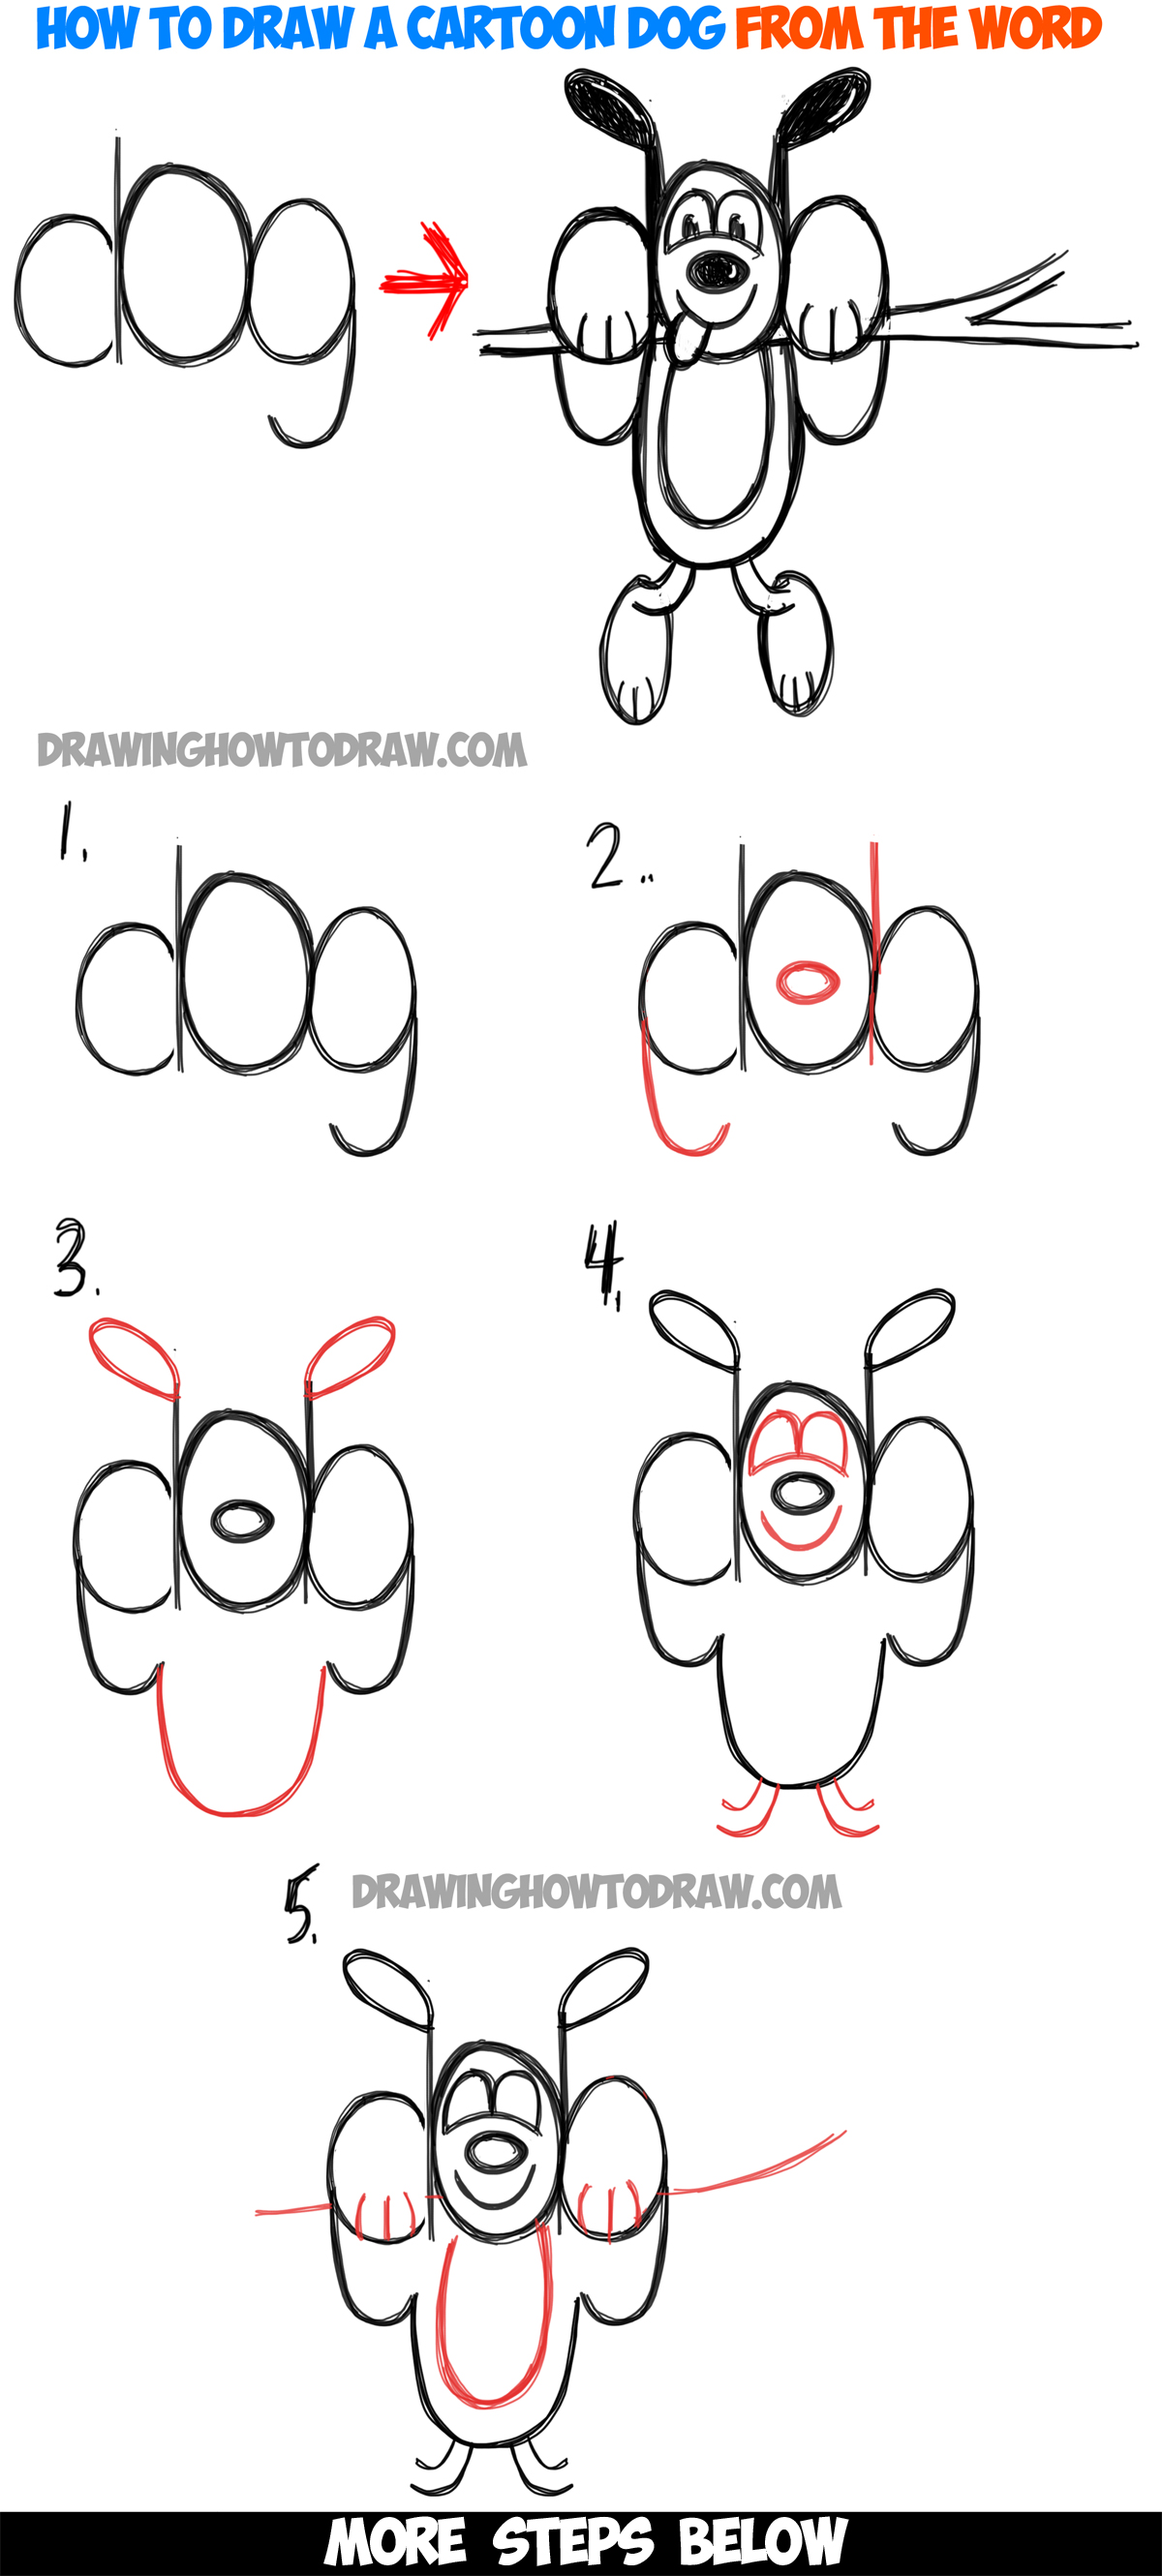 How to Draw A Cartoon Dog Hanging Out from the Word 'dog' Easy